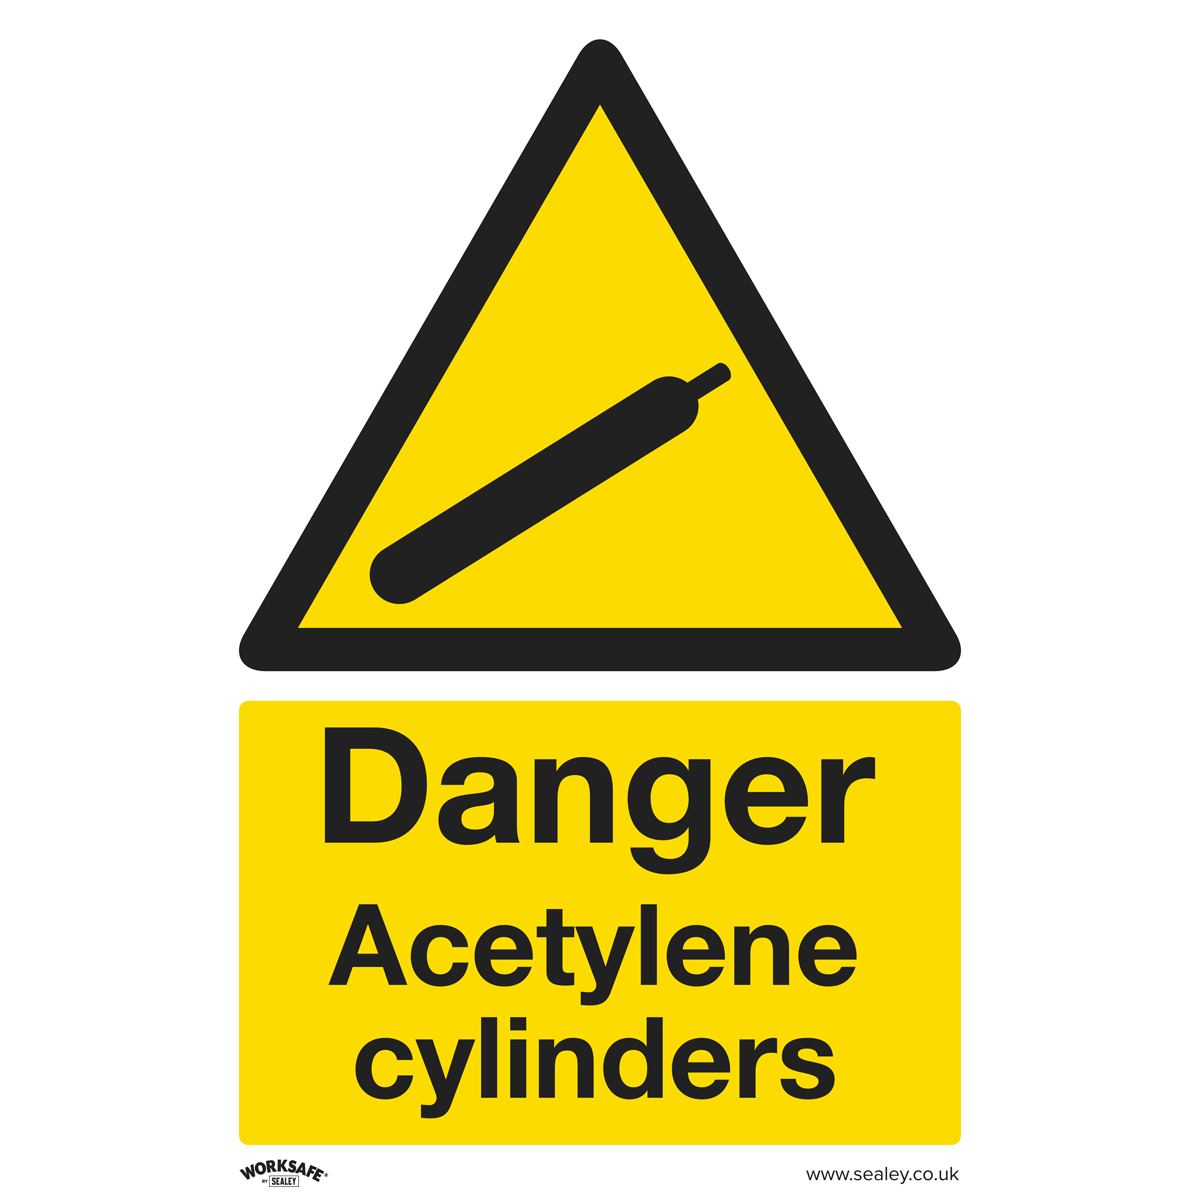 Warning Safety Sign - Danger Acetylene Cylinders - Self-Adhesive Vinyl - Pack of 10 - SS63V10 - Farming Parts